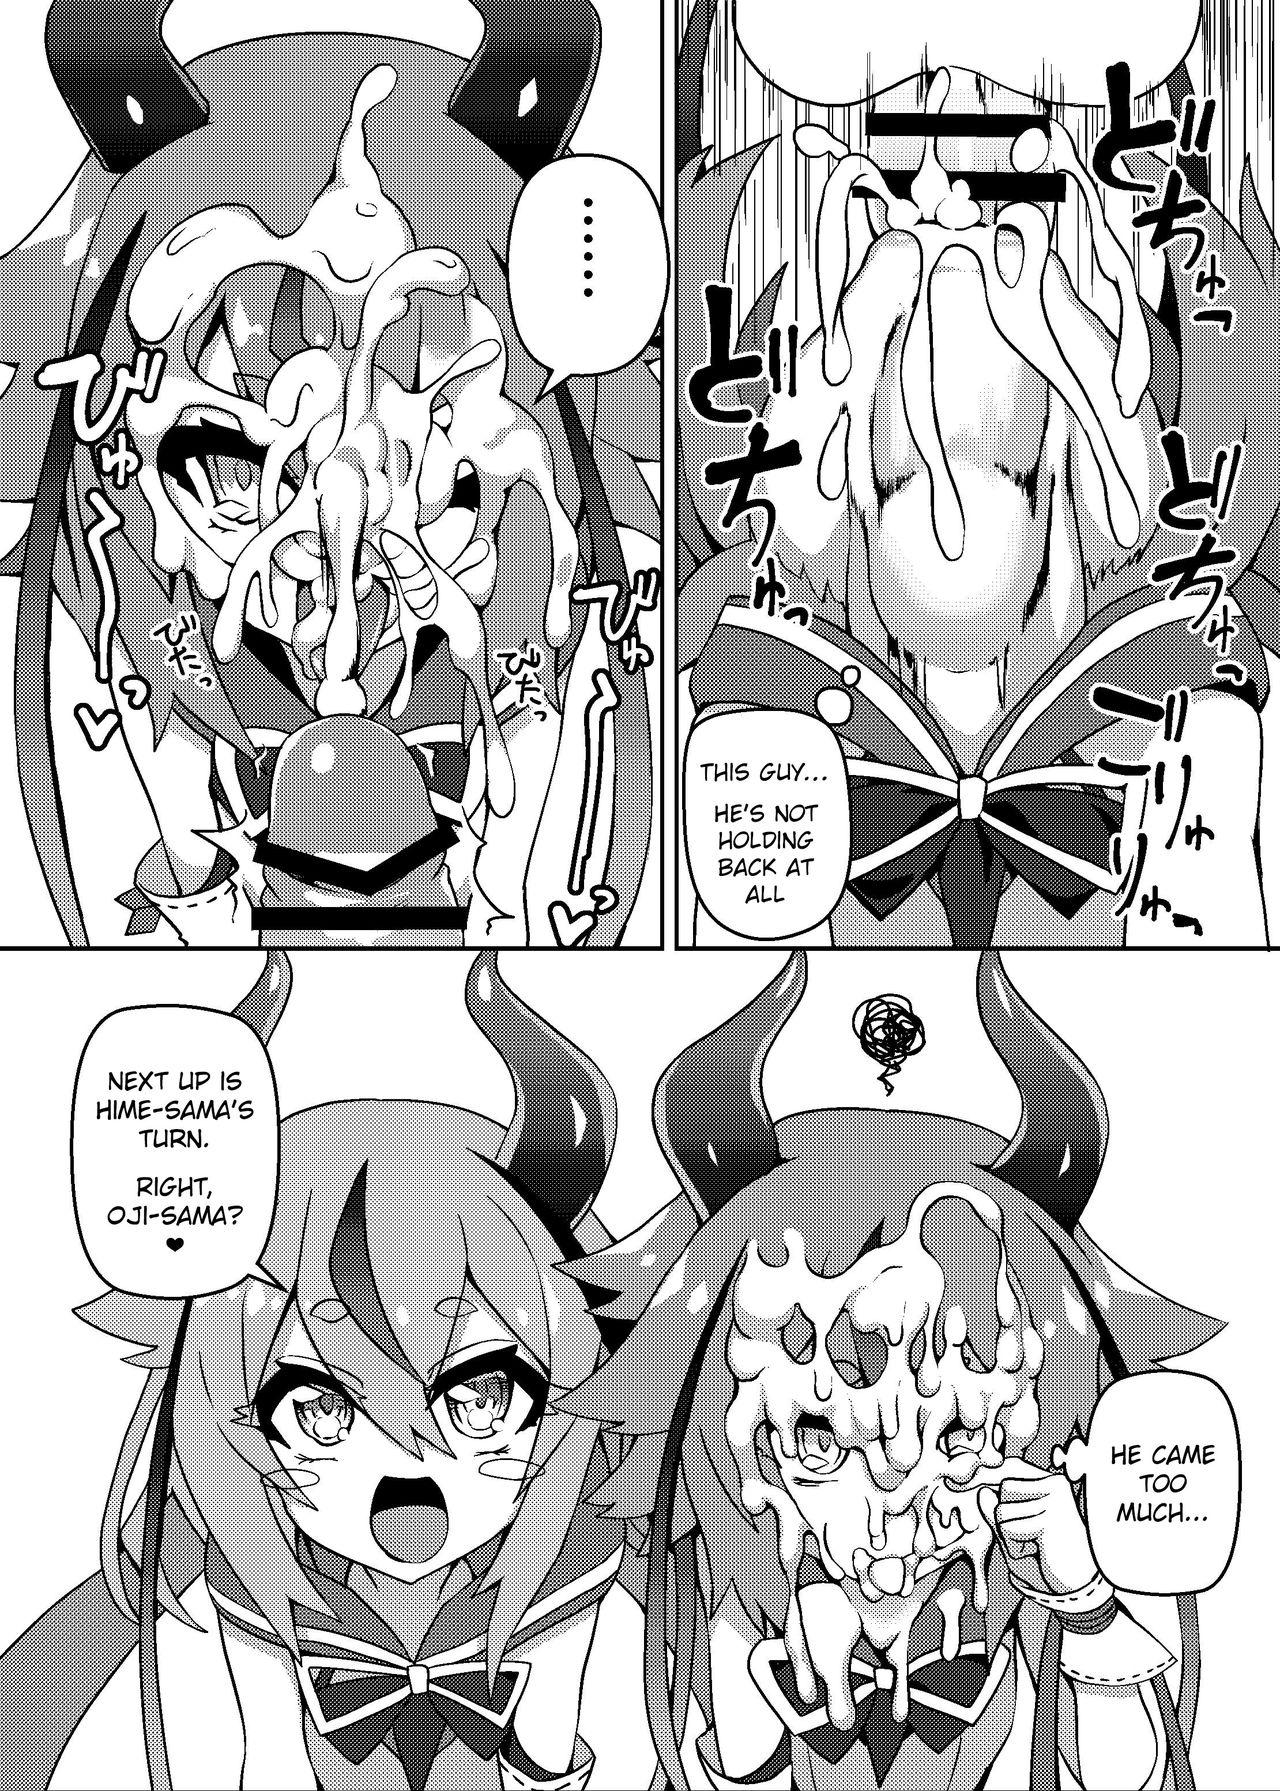 Passionate Talk Character Okuchi Only Book - Vocaloid Voiceroid Sucks - Page 3